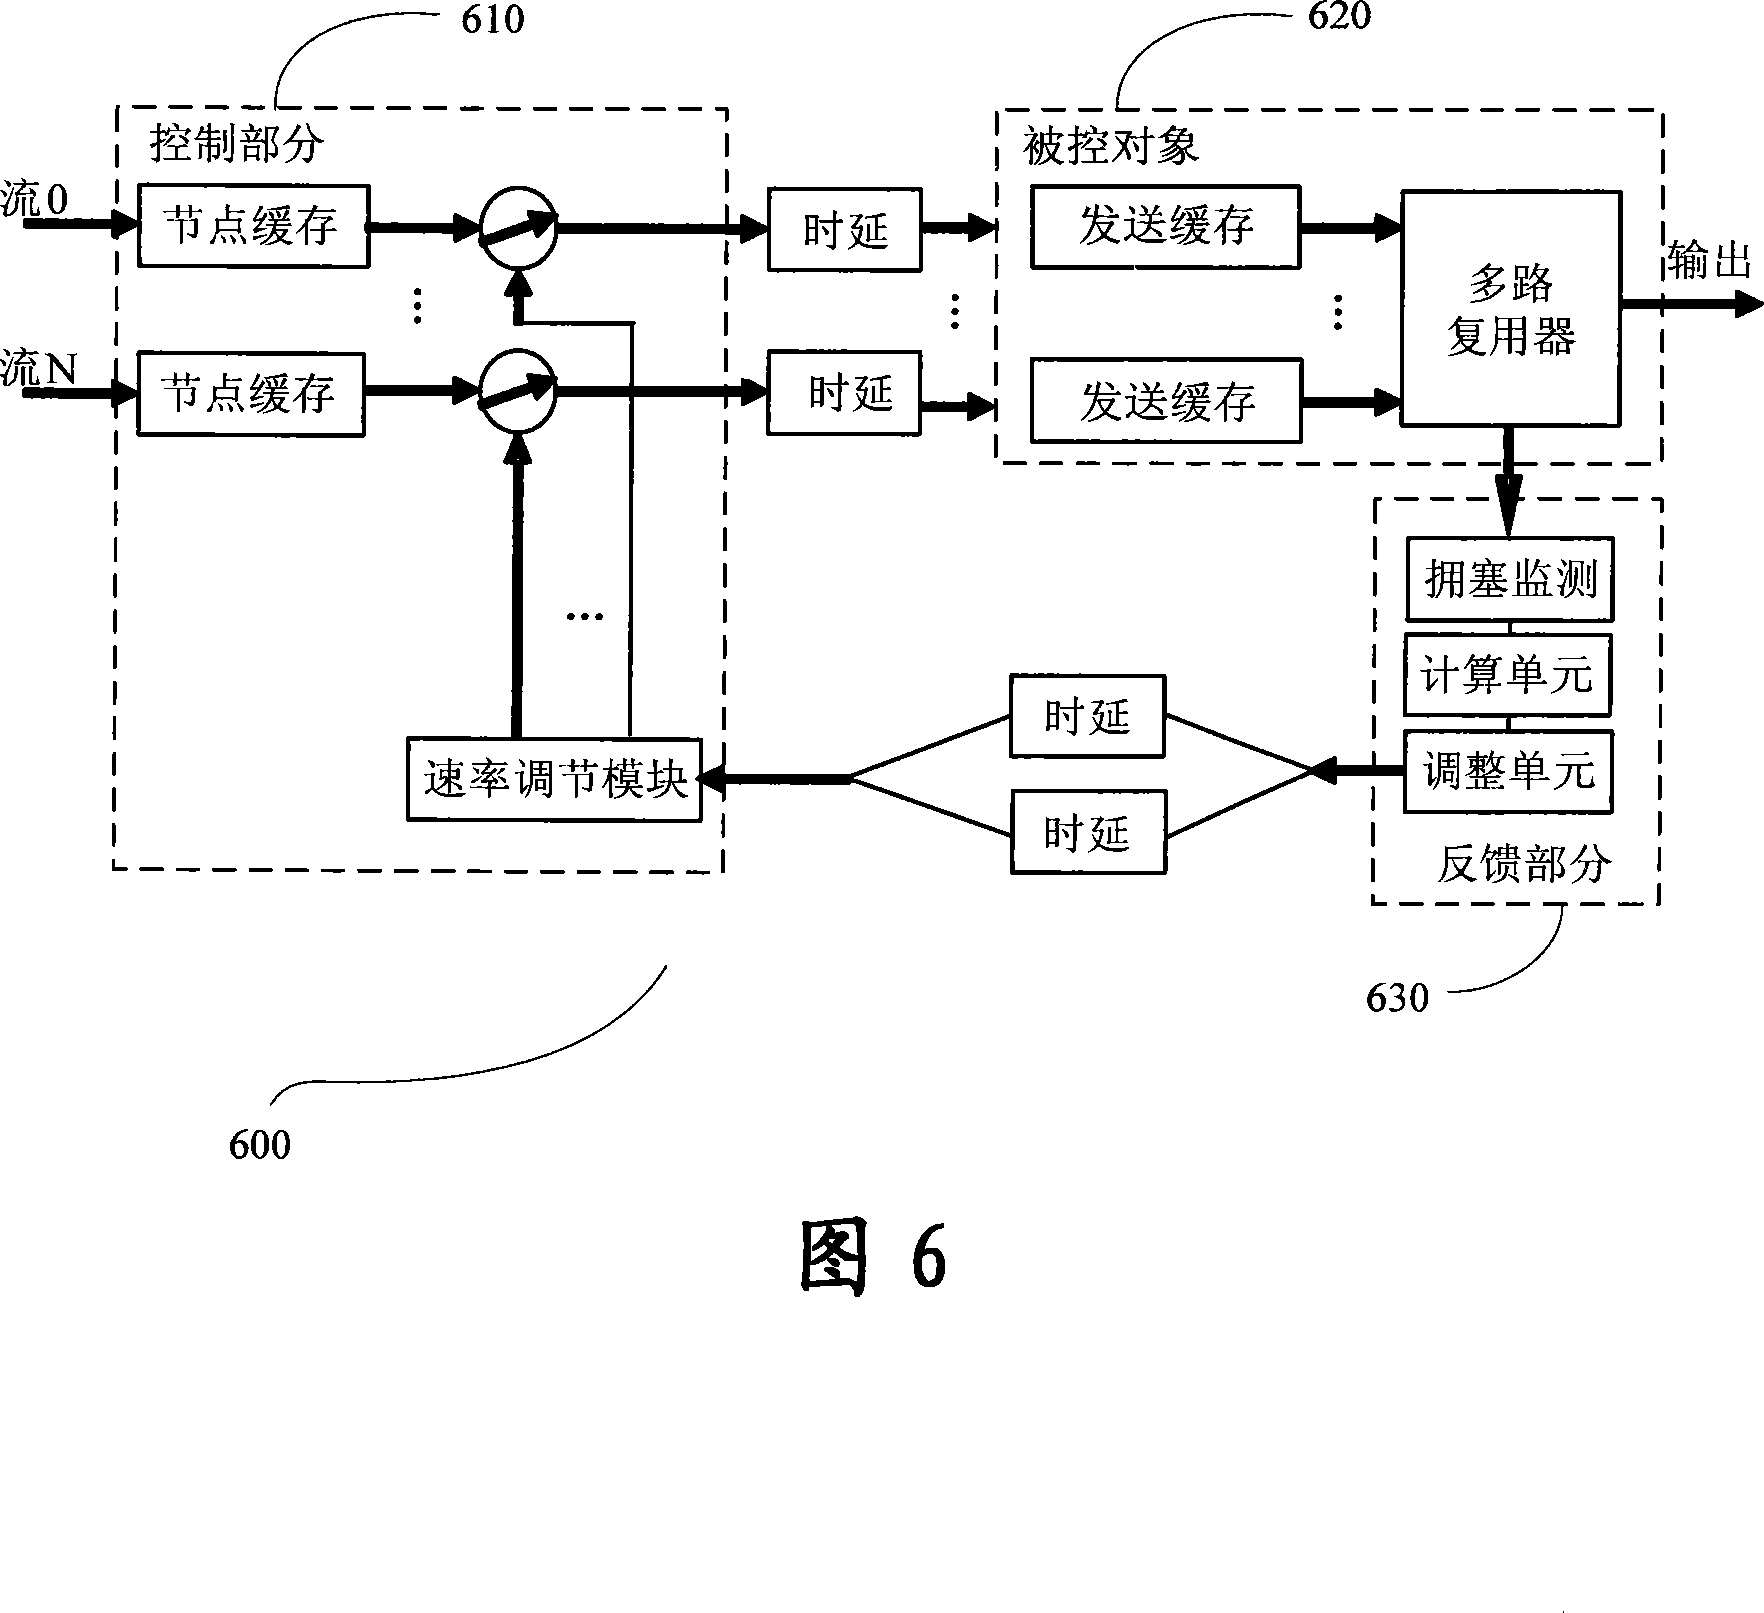 System and method for node band width equitable distribution on elastic grouping ring